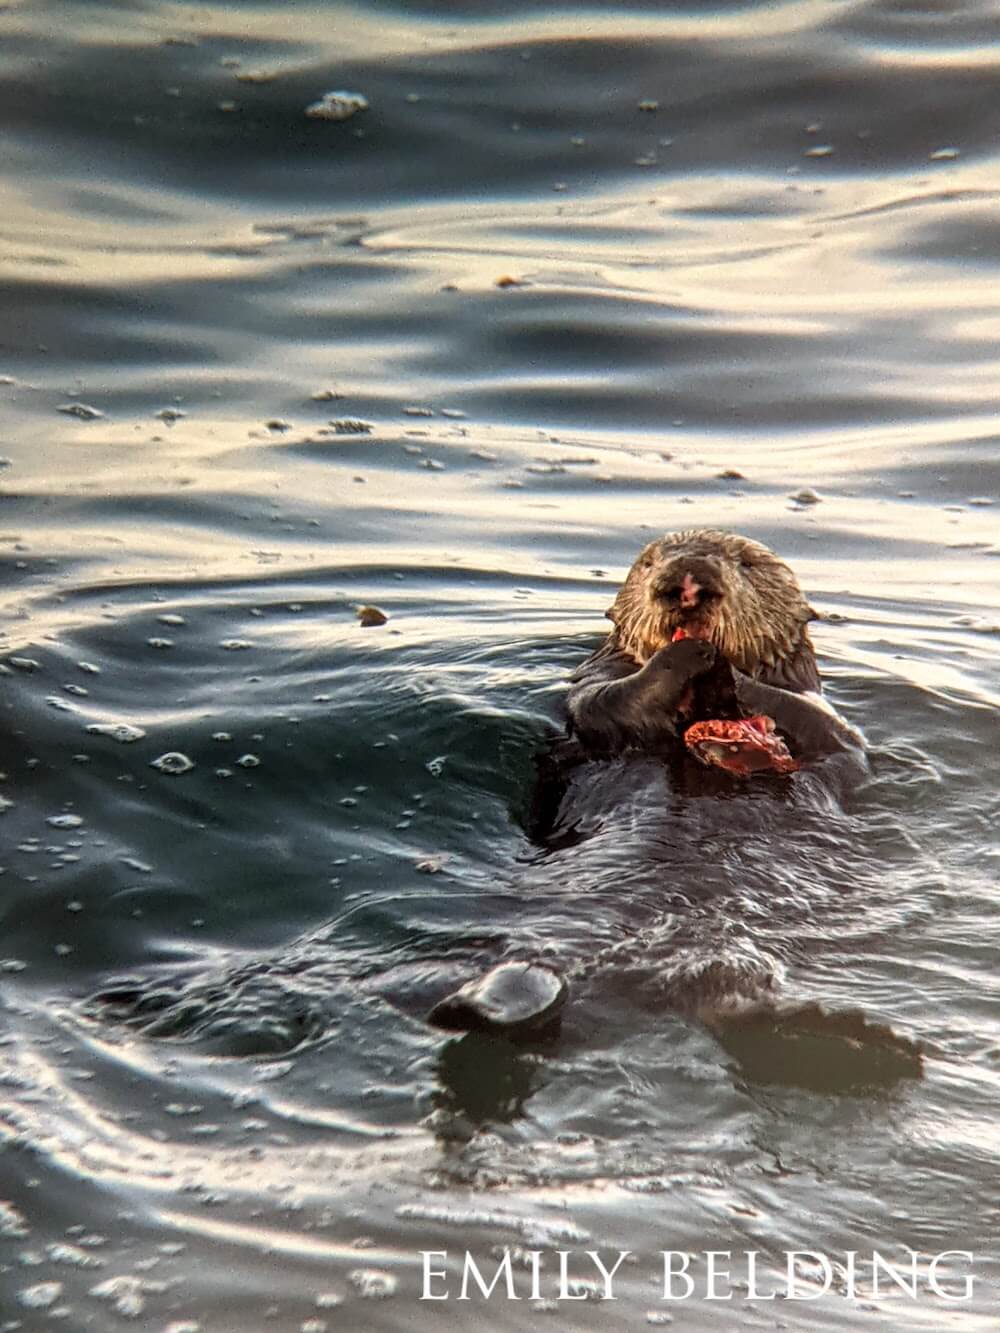 Sea otter feasting on a crab in sun-tinged waters.